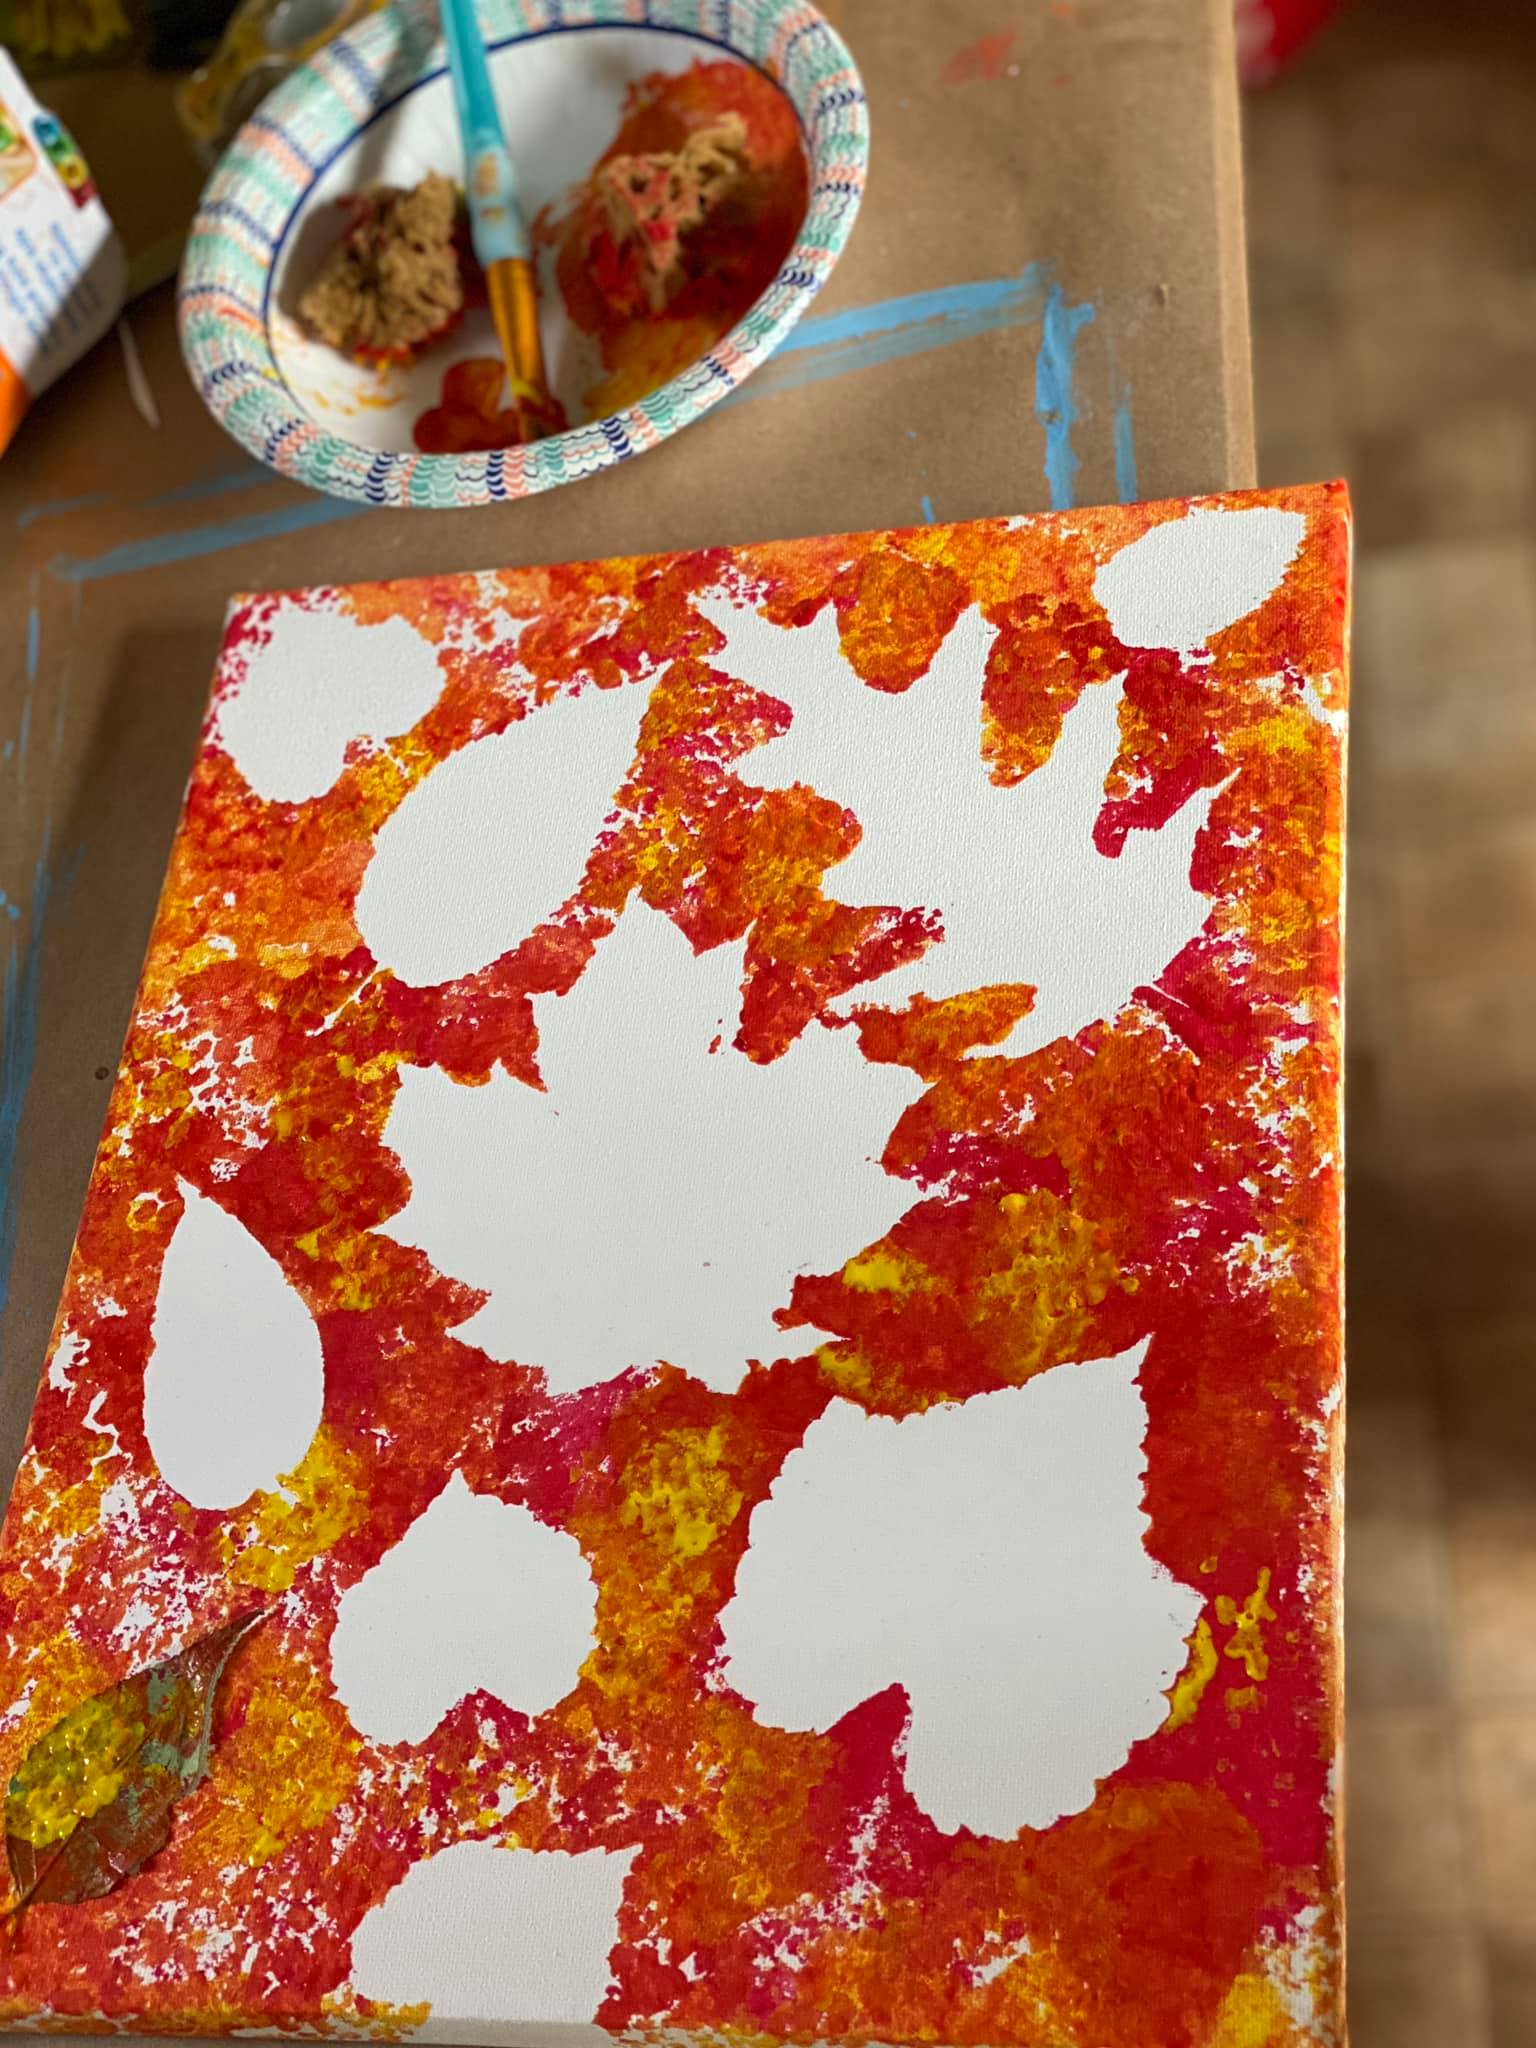 Brianna - find leaves use double sided tape to stick them on a canvas. Paint  with sponges (sea sponge) and then remove the leaves soft leaves work best  - My Bored Toddler